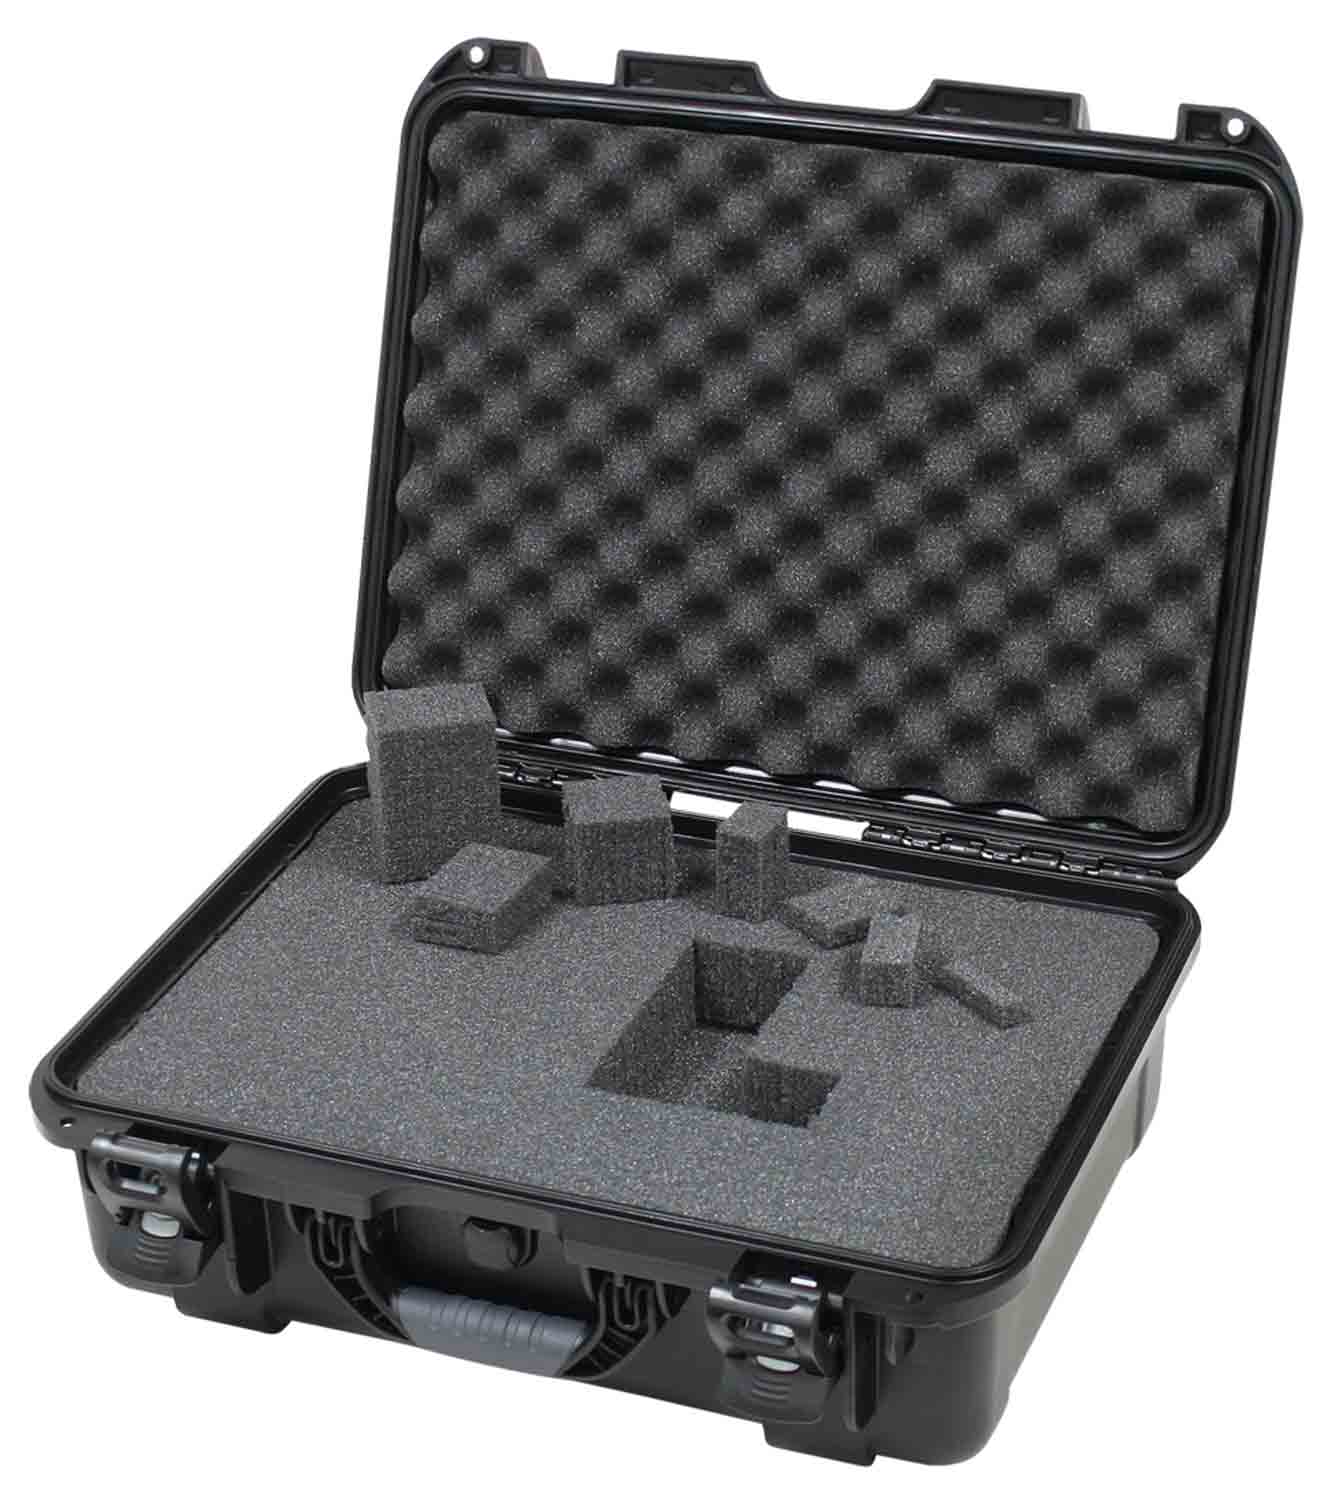 Gator Cases GU-1813-06-WPDF Waterproof Injection Molded Case with Interior Dimensions of 18″ x 13″ x 6.9″ - Hollywood DJ